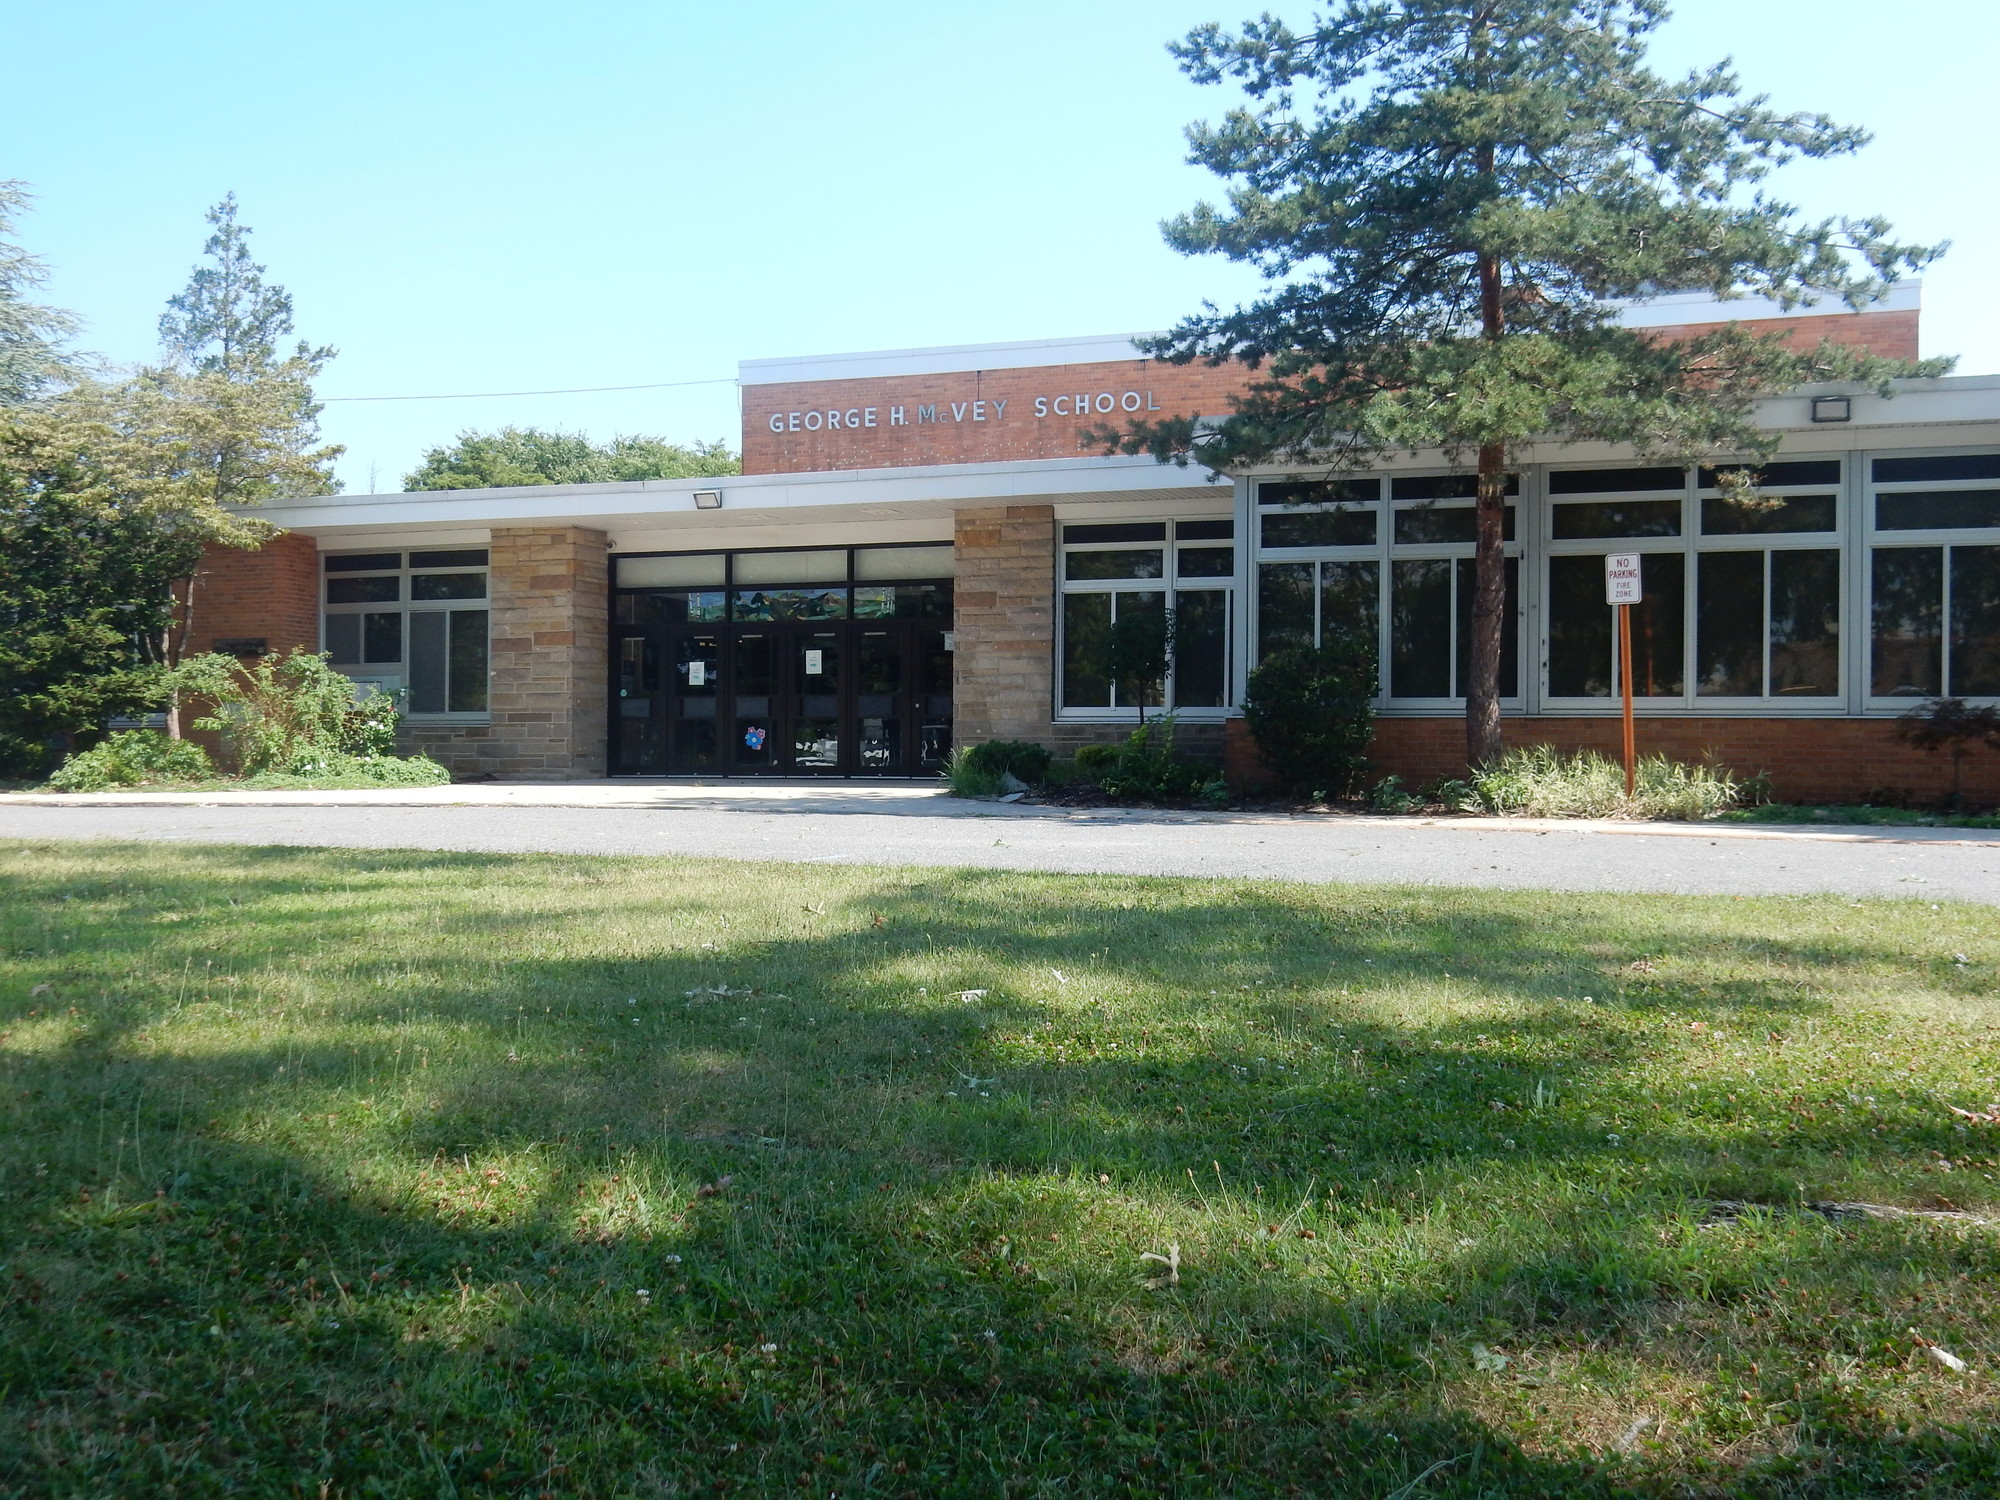 McVey Elementary School was one of 19 schools nominated in January by the State Education Department for the Blue Ribbon award.